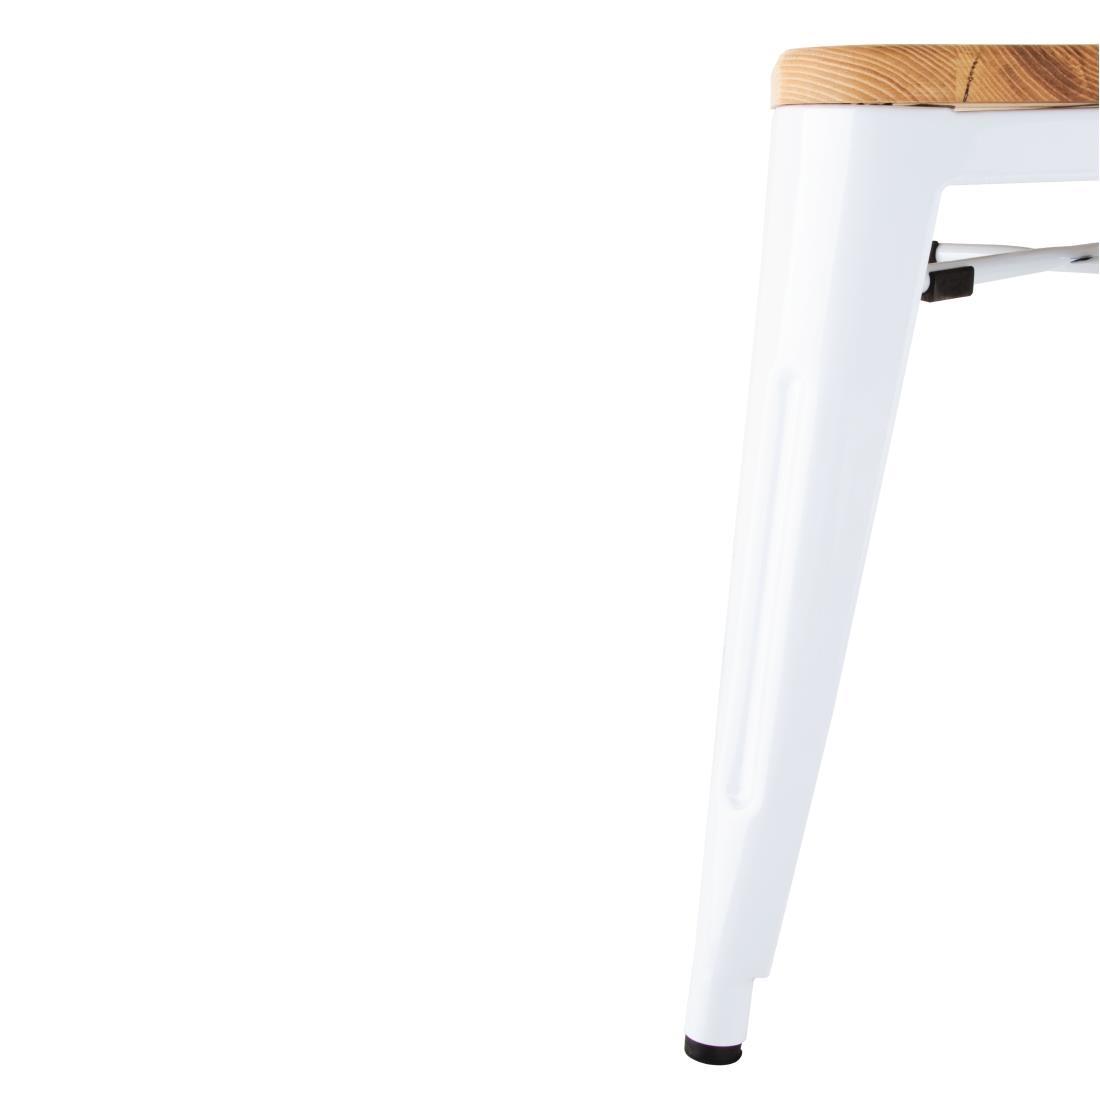 Bolero Bistro Low Stools with Wooden Seatpad White (Pack of 4) - DW738  - 3